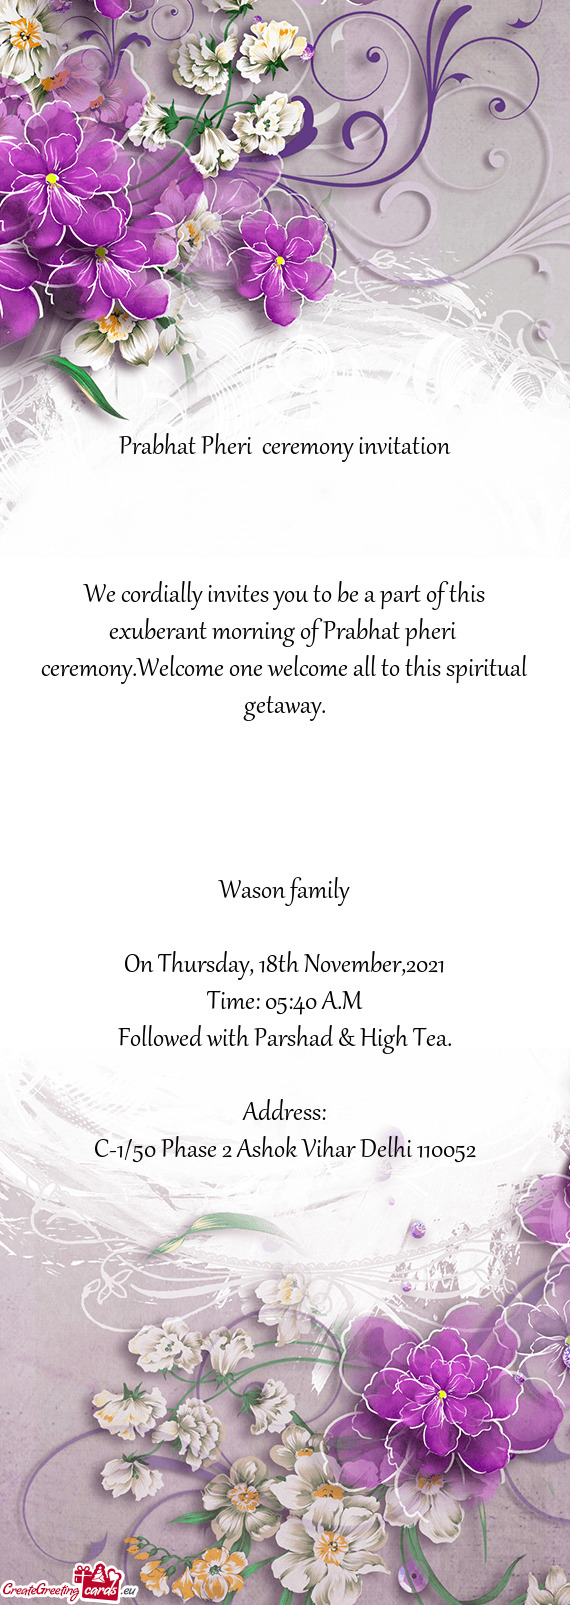 We cordially invites you to be a part of this exuberant morning of Prabhat pheri ceremony.Welcome o